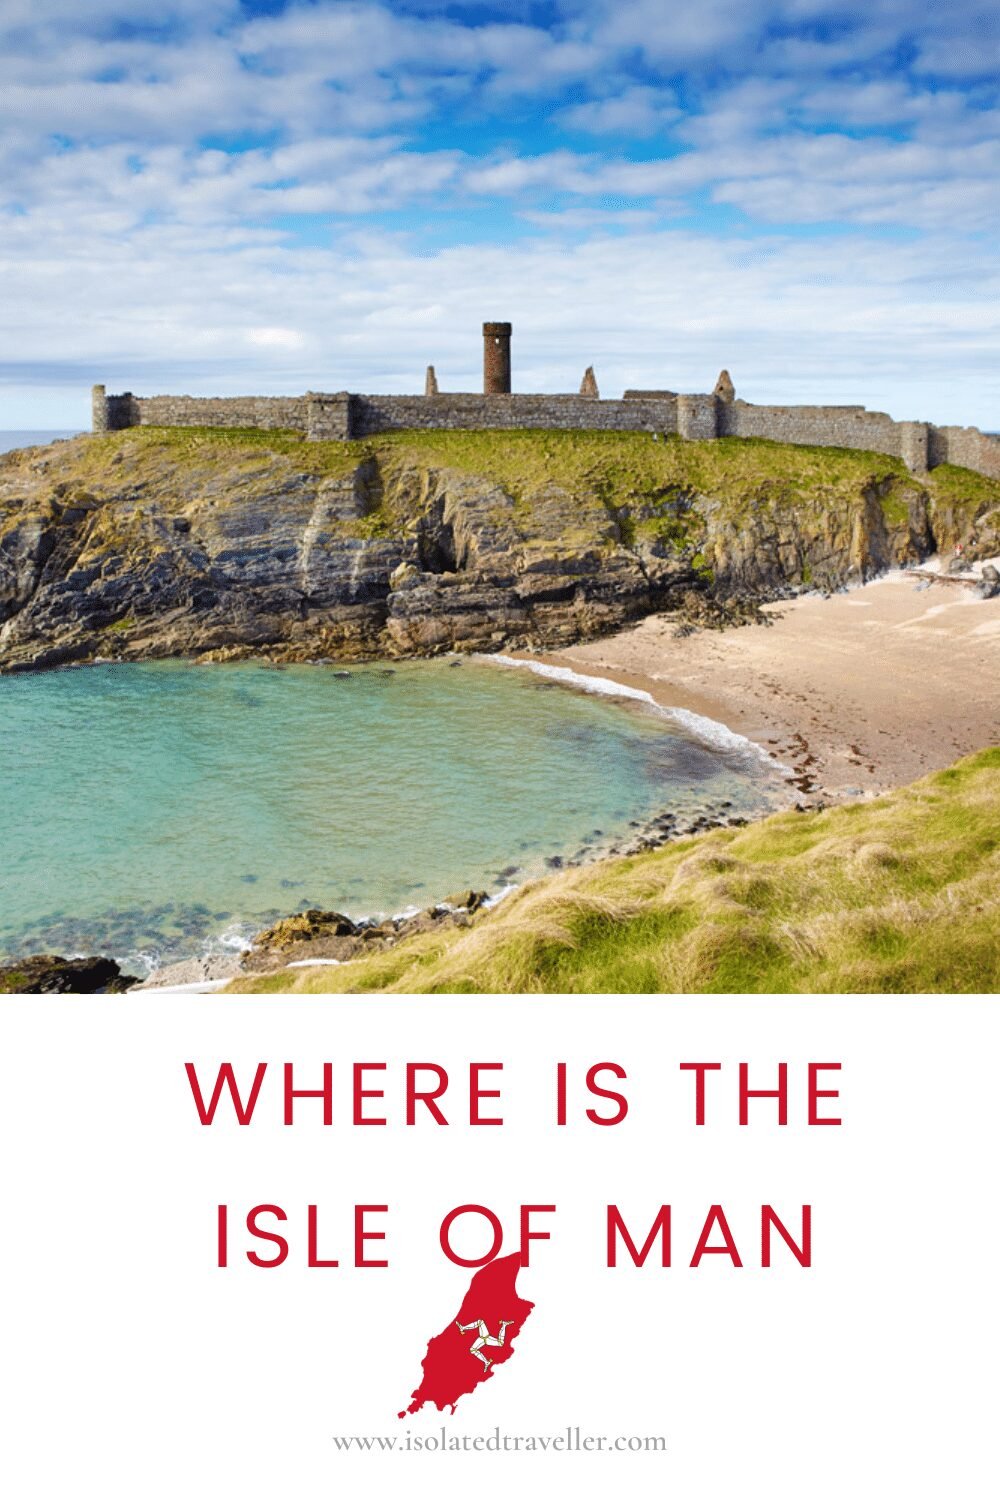 Where Is the isle of man